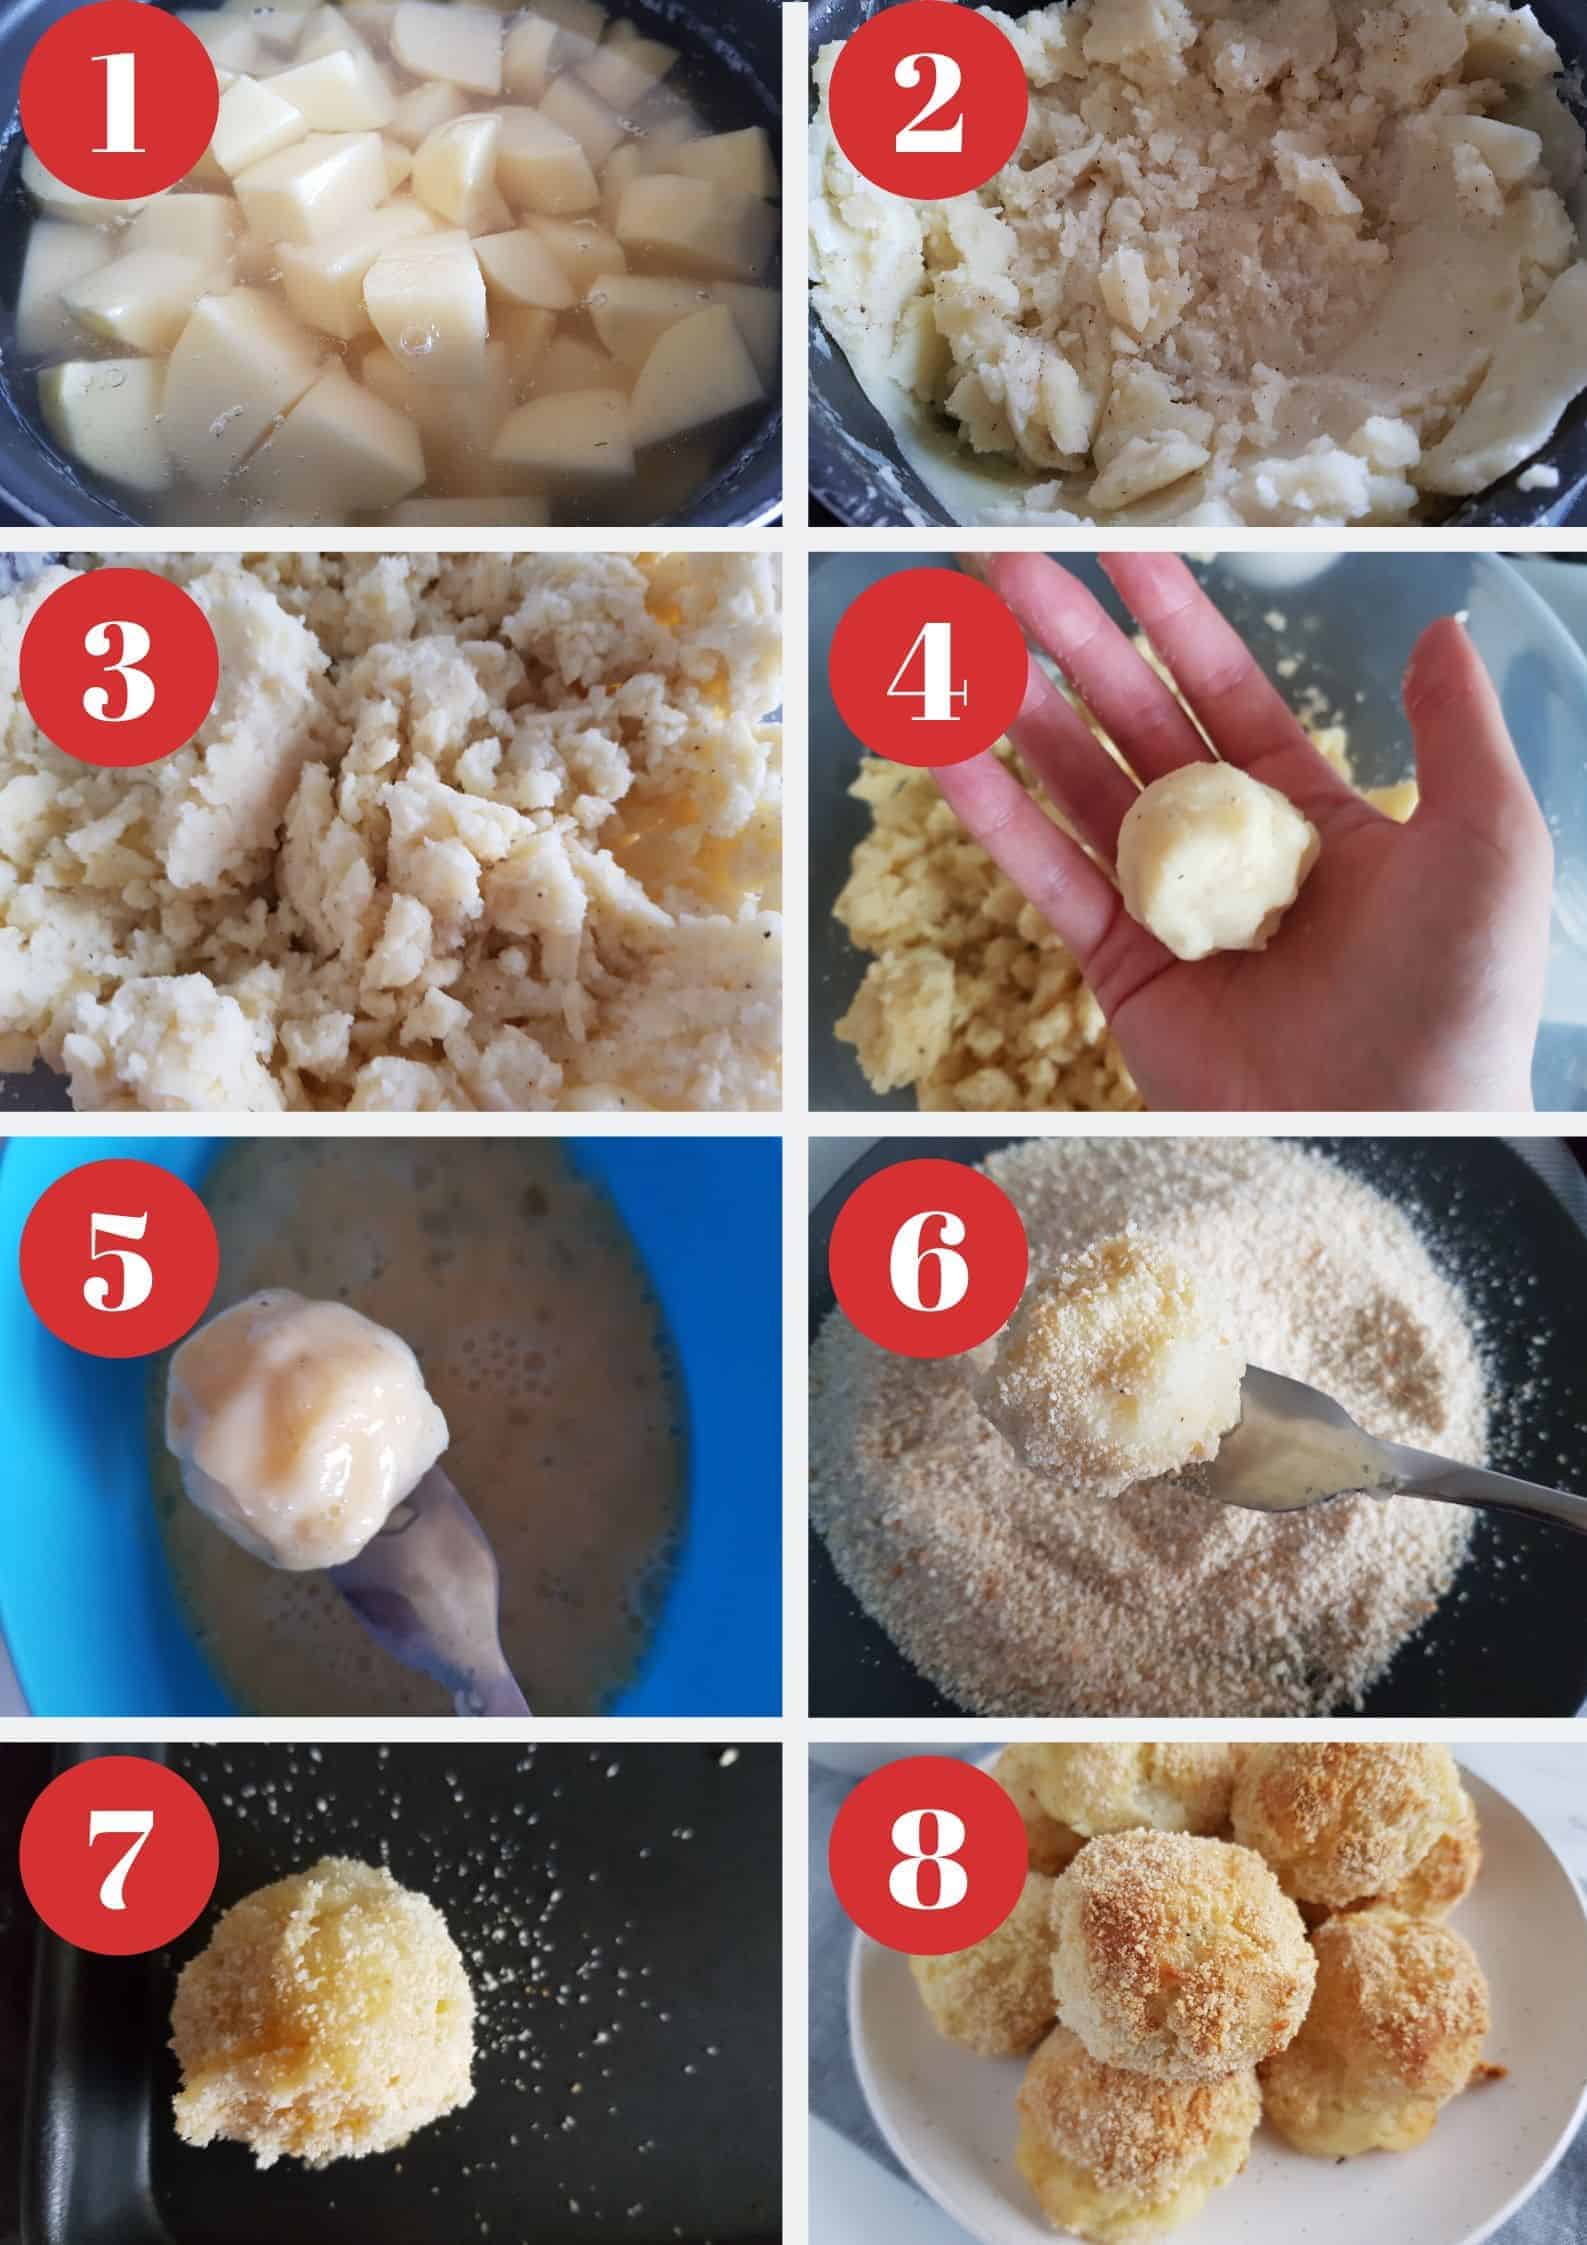 Infographic showing how to make potato and cheese balls.